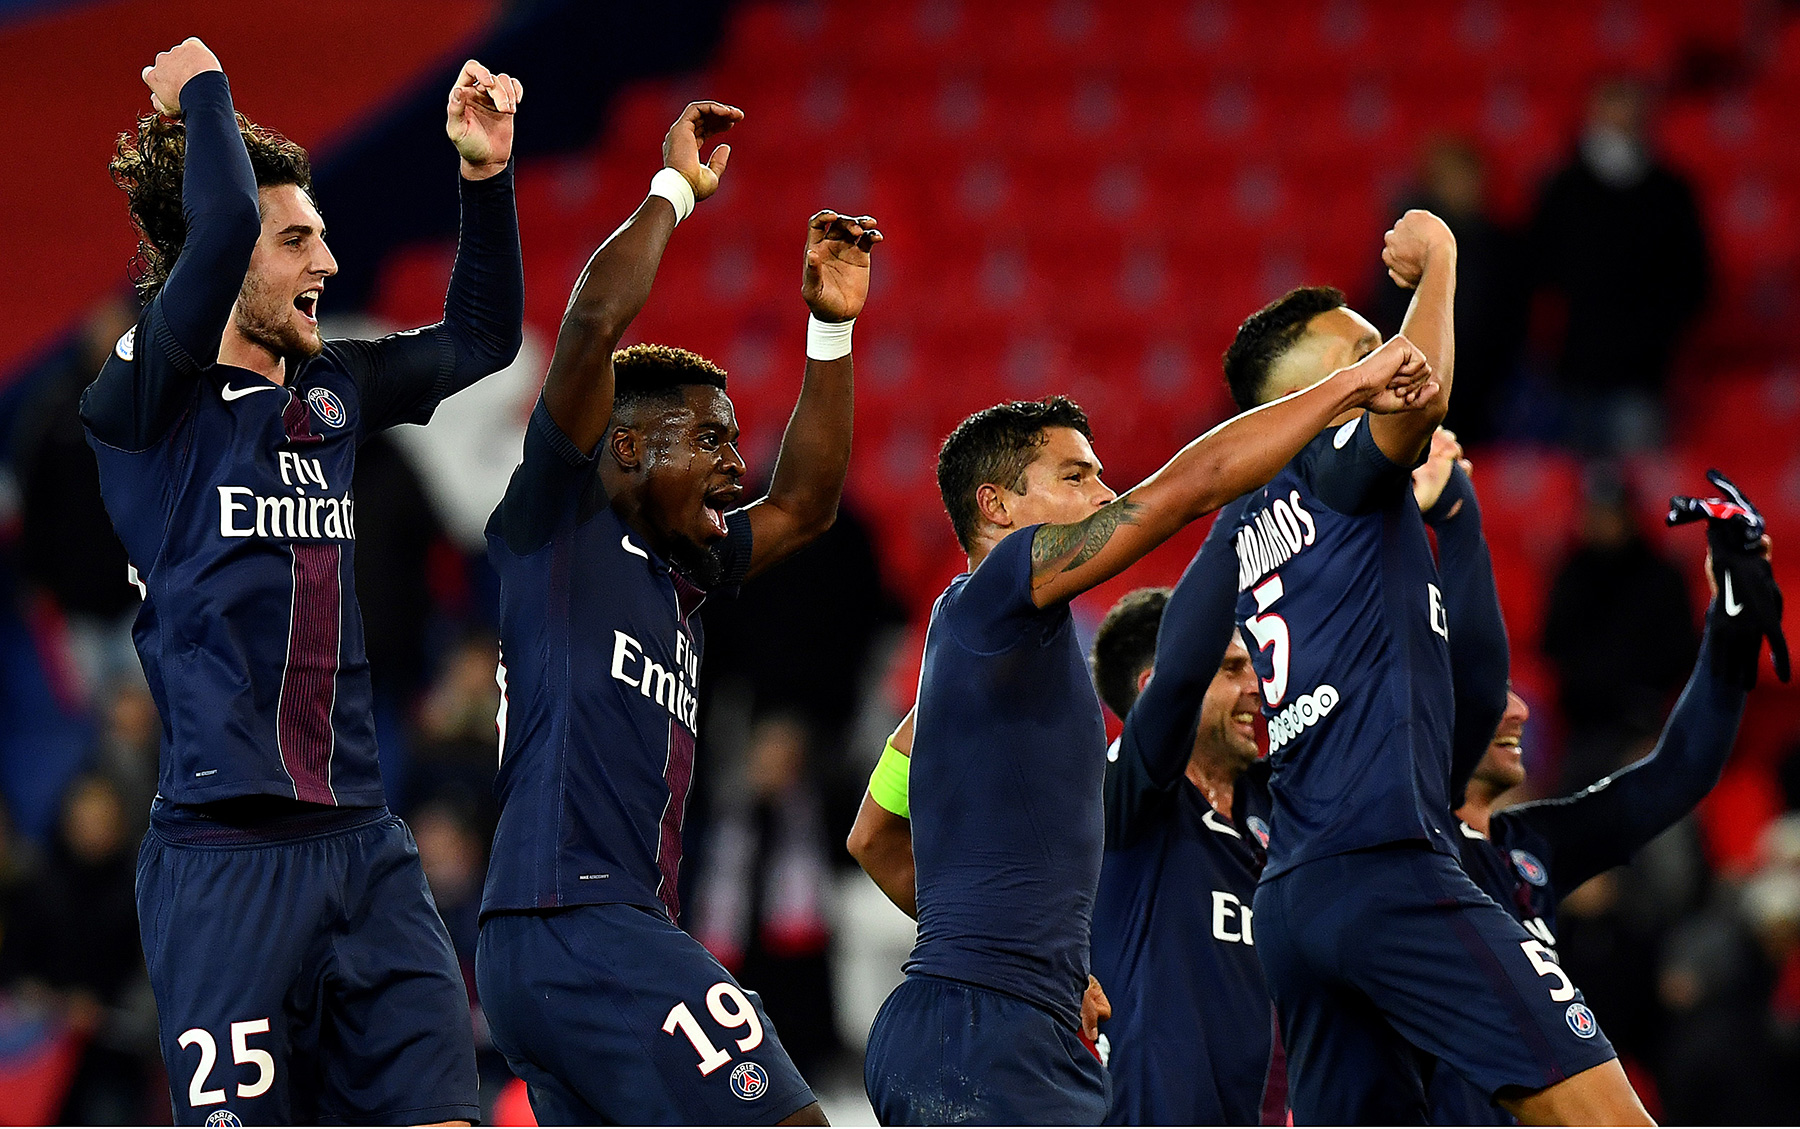 Match in Photos: PSG's Dominating Win Over Rennes - PSG Talk